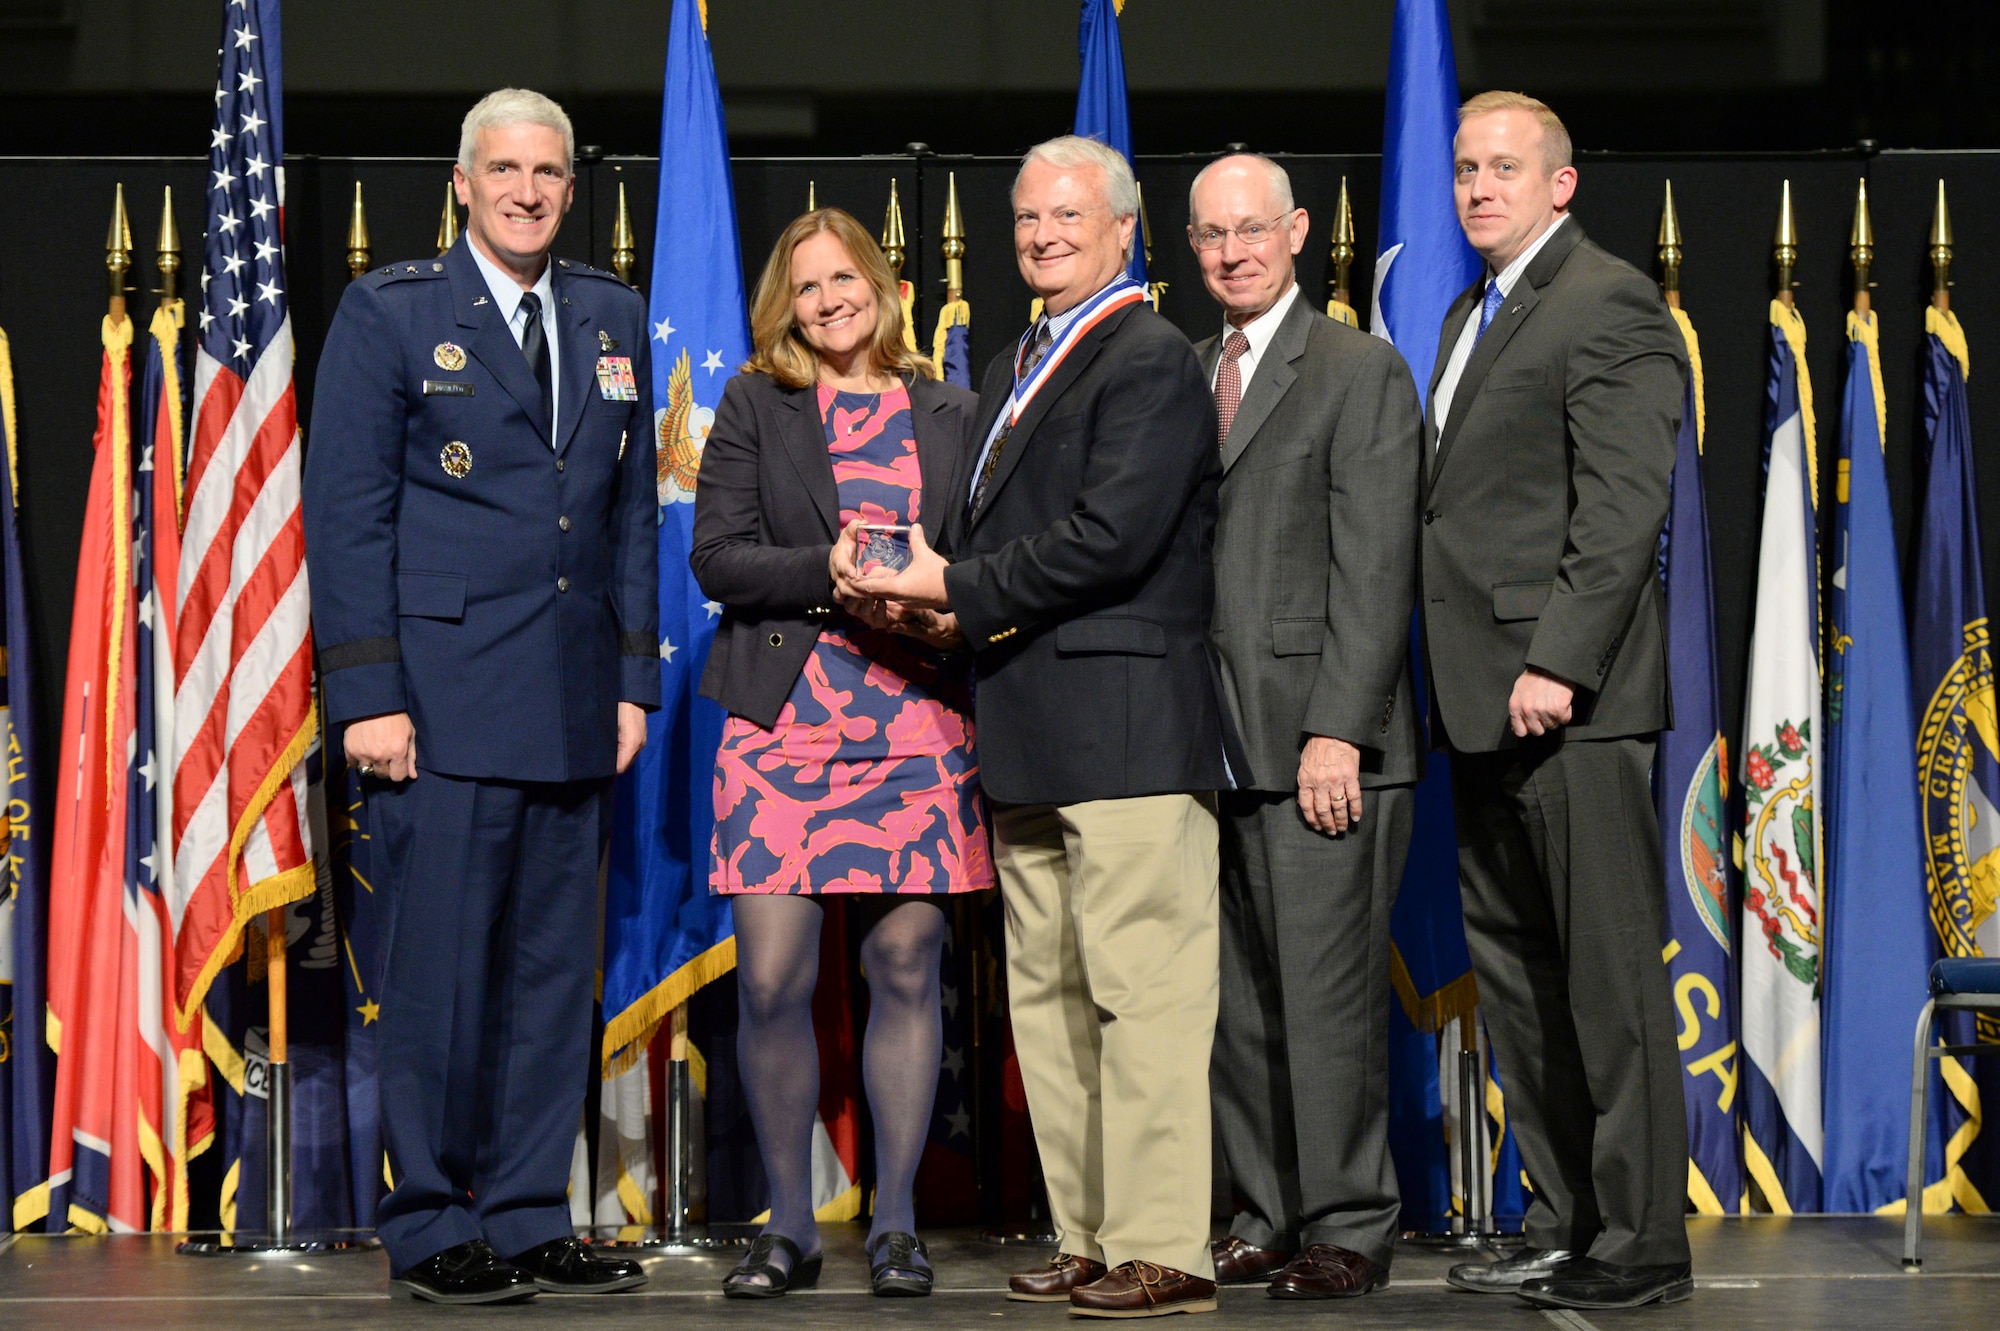 Mr. Paul Kervin, senior research physicist, Air Force Research Laboratory Directed Energy Directorate, and his wife Grace, are honored during the AFRL Fellows and Early Career Awards Banquet, Oct. 30 at the National Museum of the U.S. Air Force. Joining them are Maj. Gen. Tom Masiello, AFRL commander, retired Maj. Gen. Dick Paul, AFRL's first commander, and Dr. Morley Stone, AFRL chief technology officer. (U.S. Air Force photo/Wesley Farnsworth)